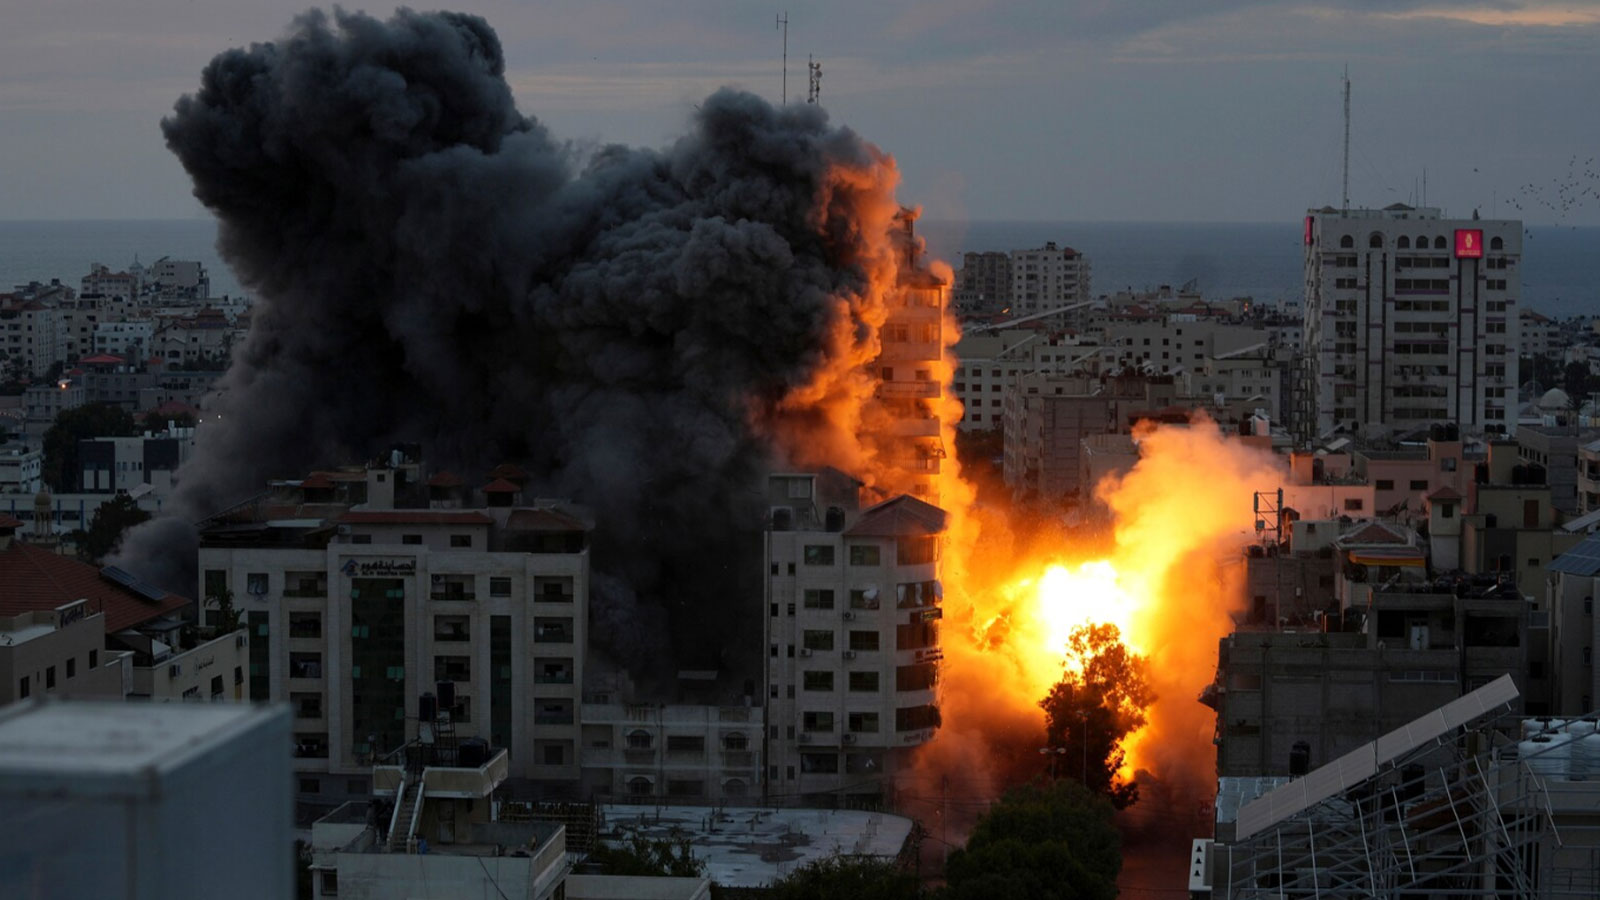 The lesson from the Hamas attack: The U.S. should recognize a Palestinian state